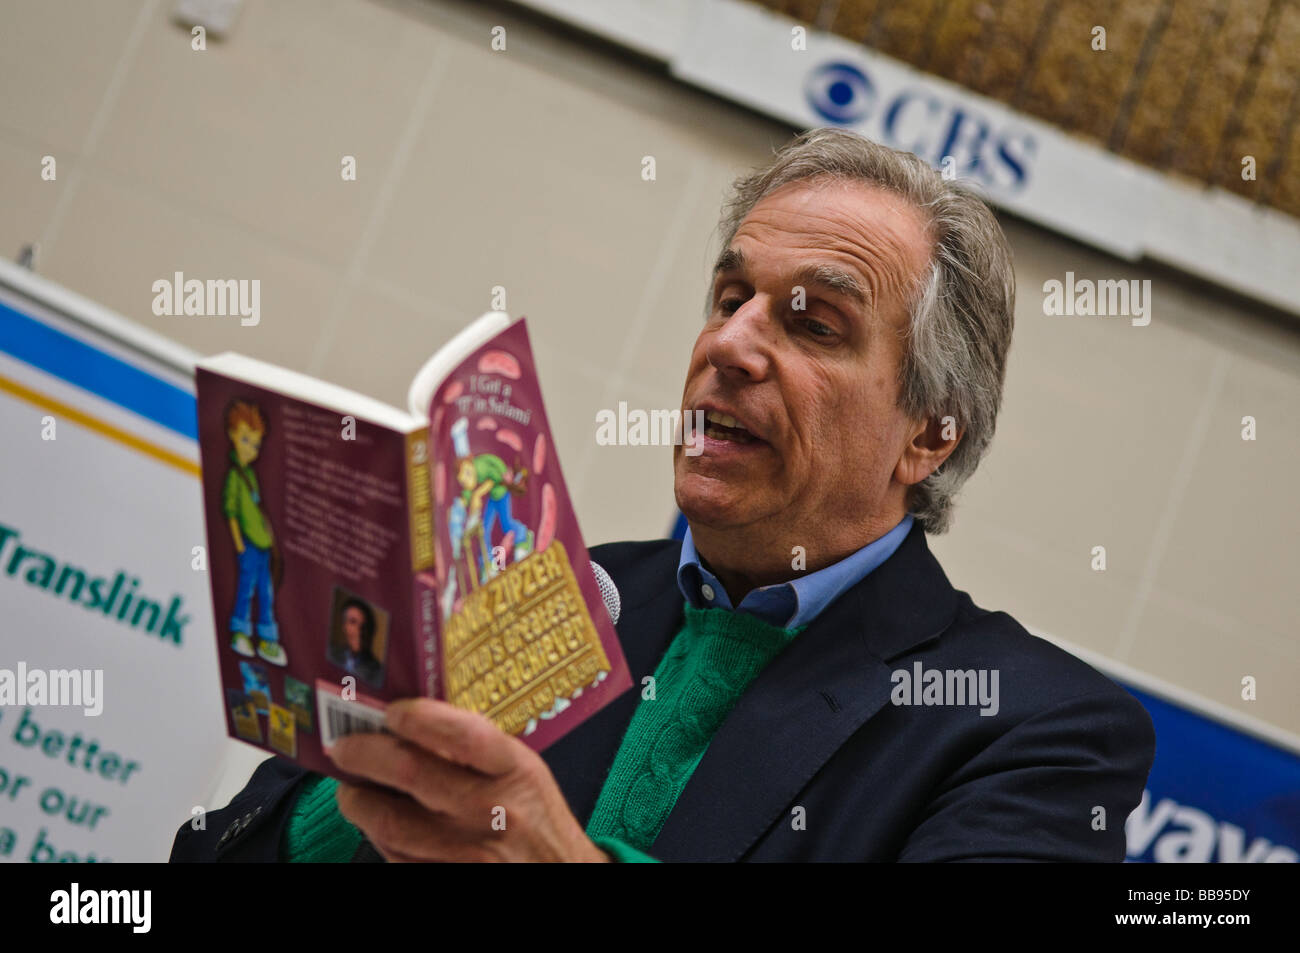 Henry Winkler, Hollywood director, producer and actor, famous for playing 'The Fonz' in 'Happy Days', attends a booksigning Stock Photo